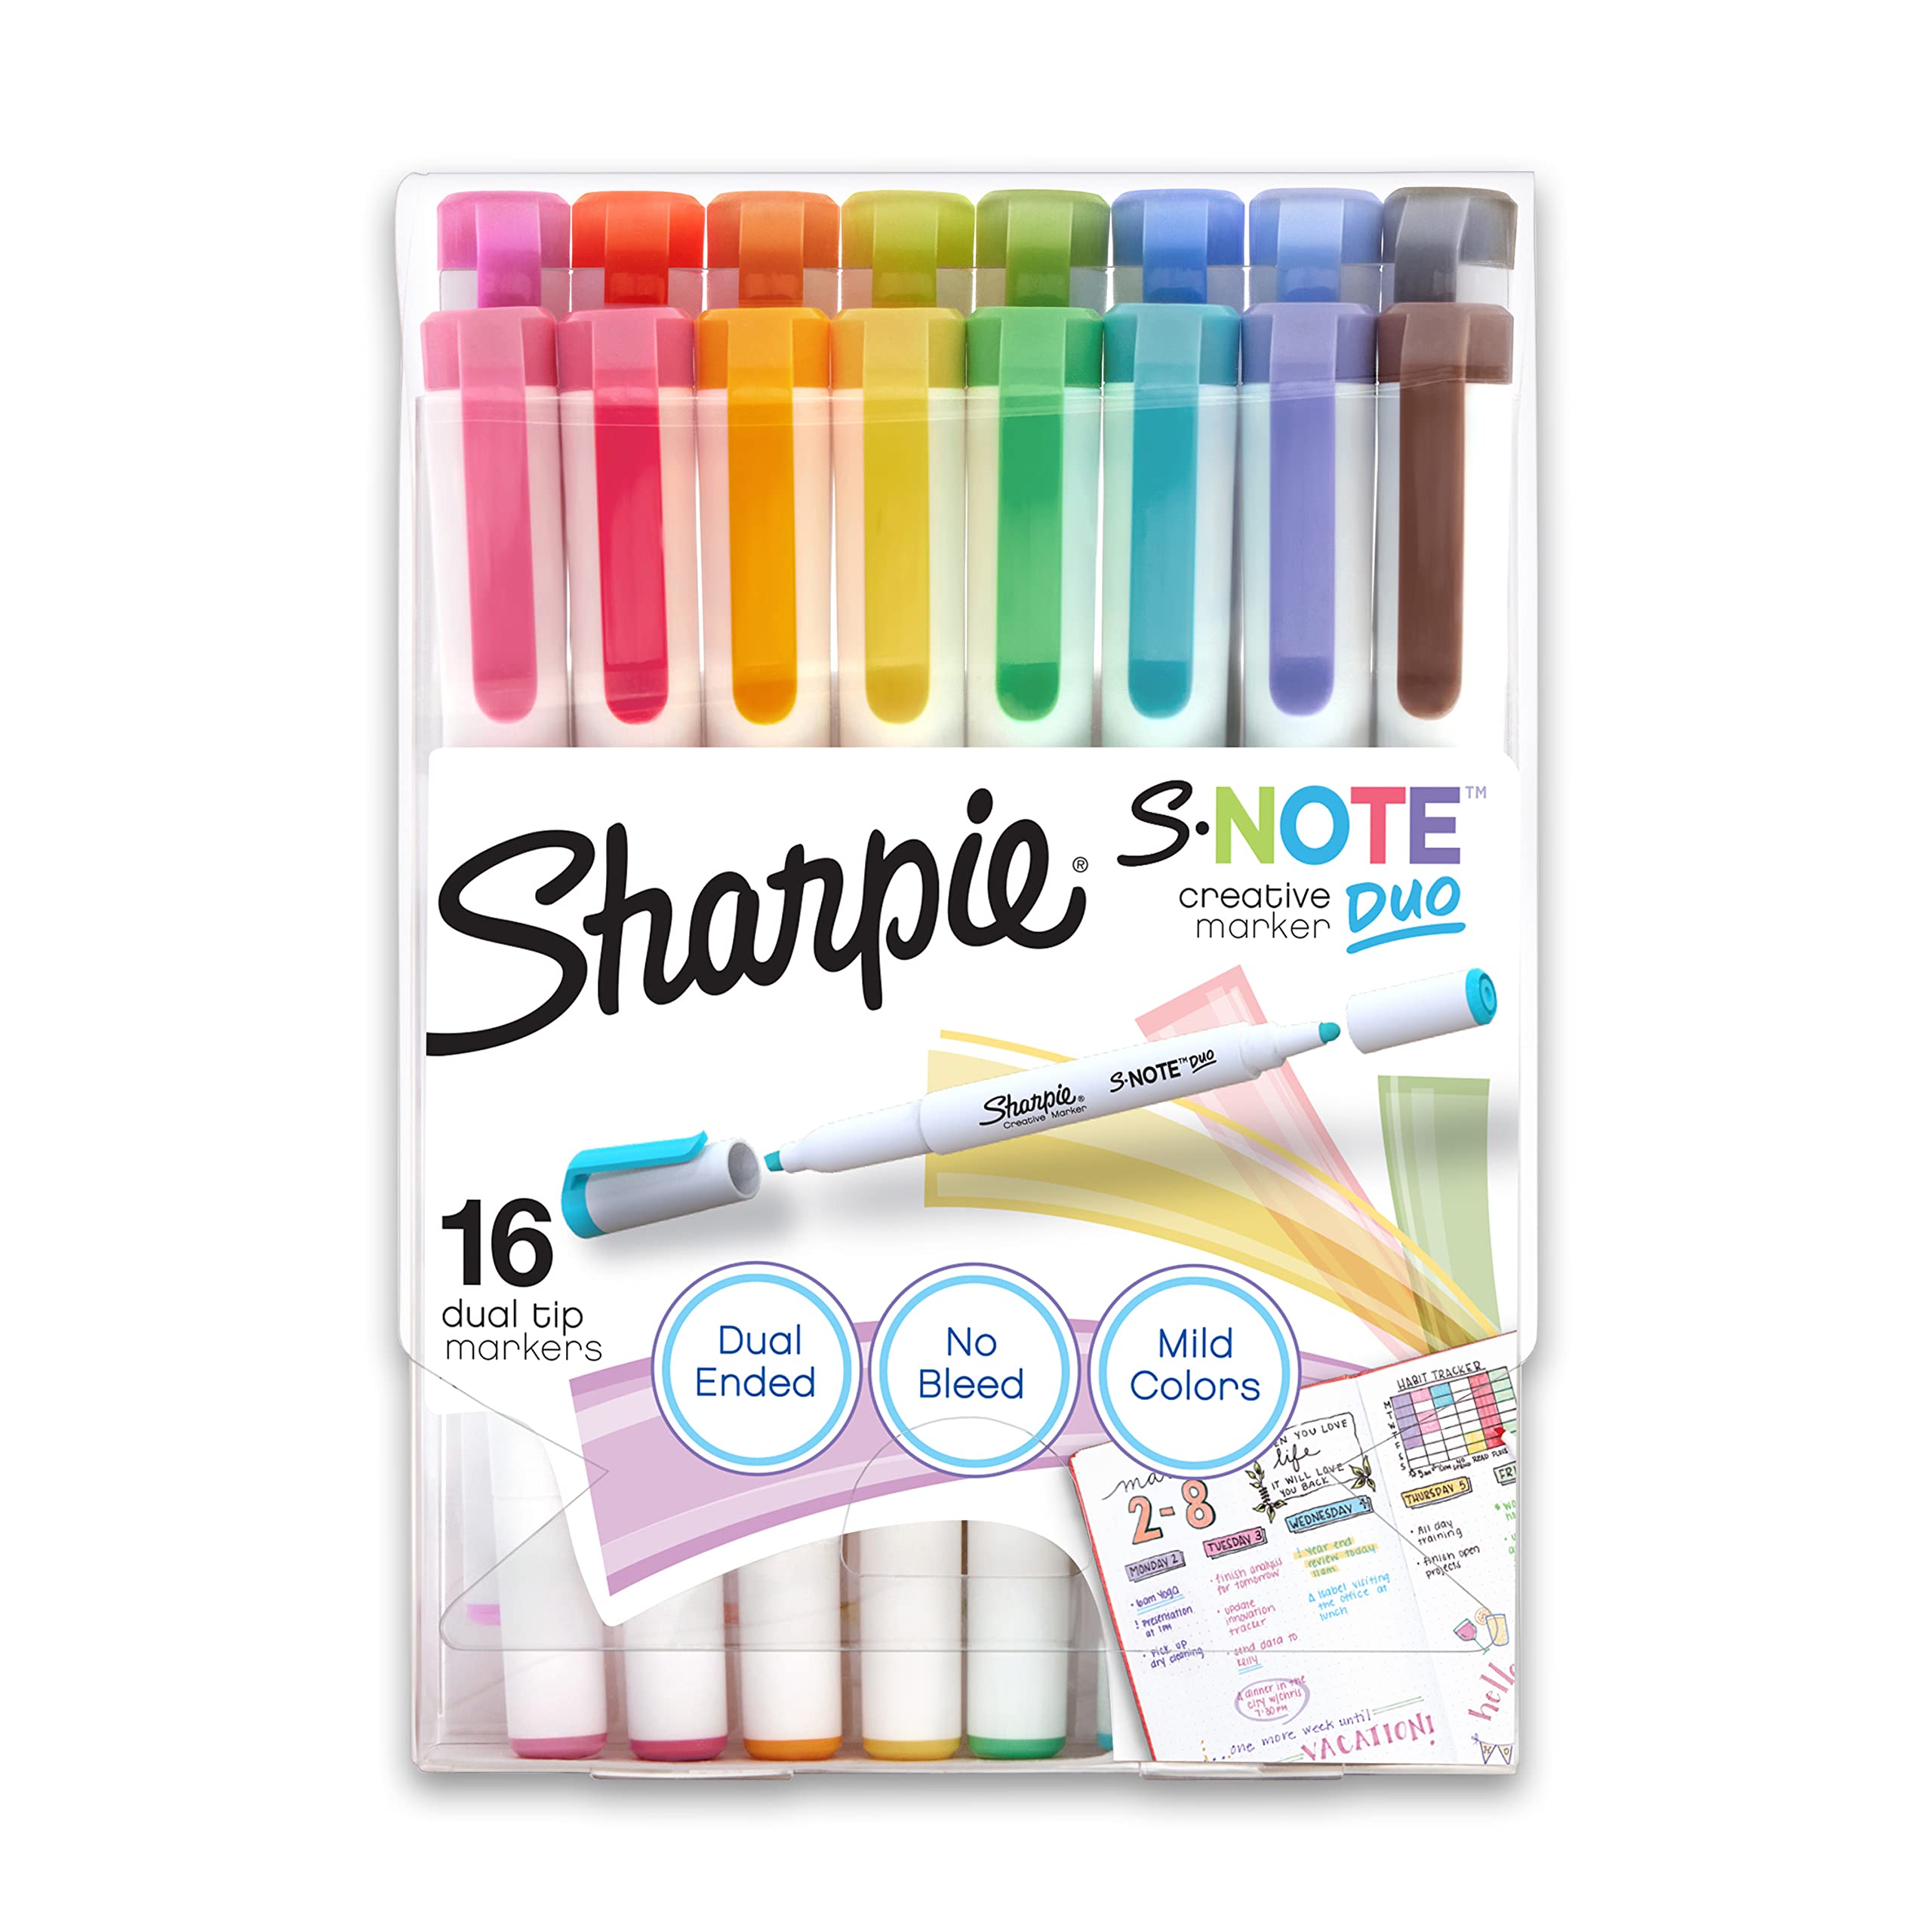 16-Count Sharpie S-Note Duo Dual-Ended Creative Markers w/ Packaging Stand-Up Easel $9.40 w/ S&S + Free Shipping w/ Prime or on $35+